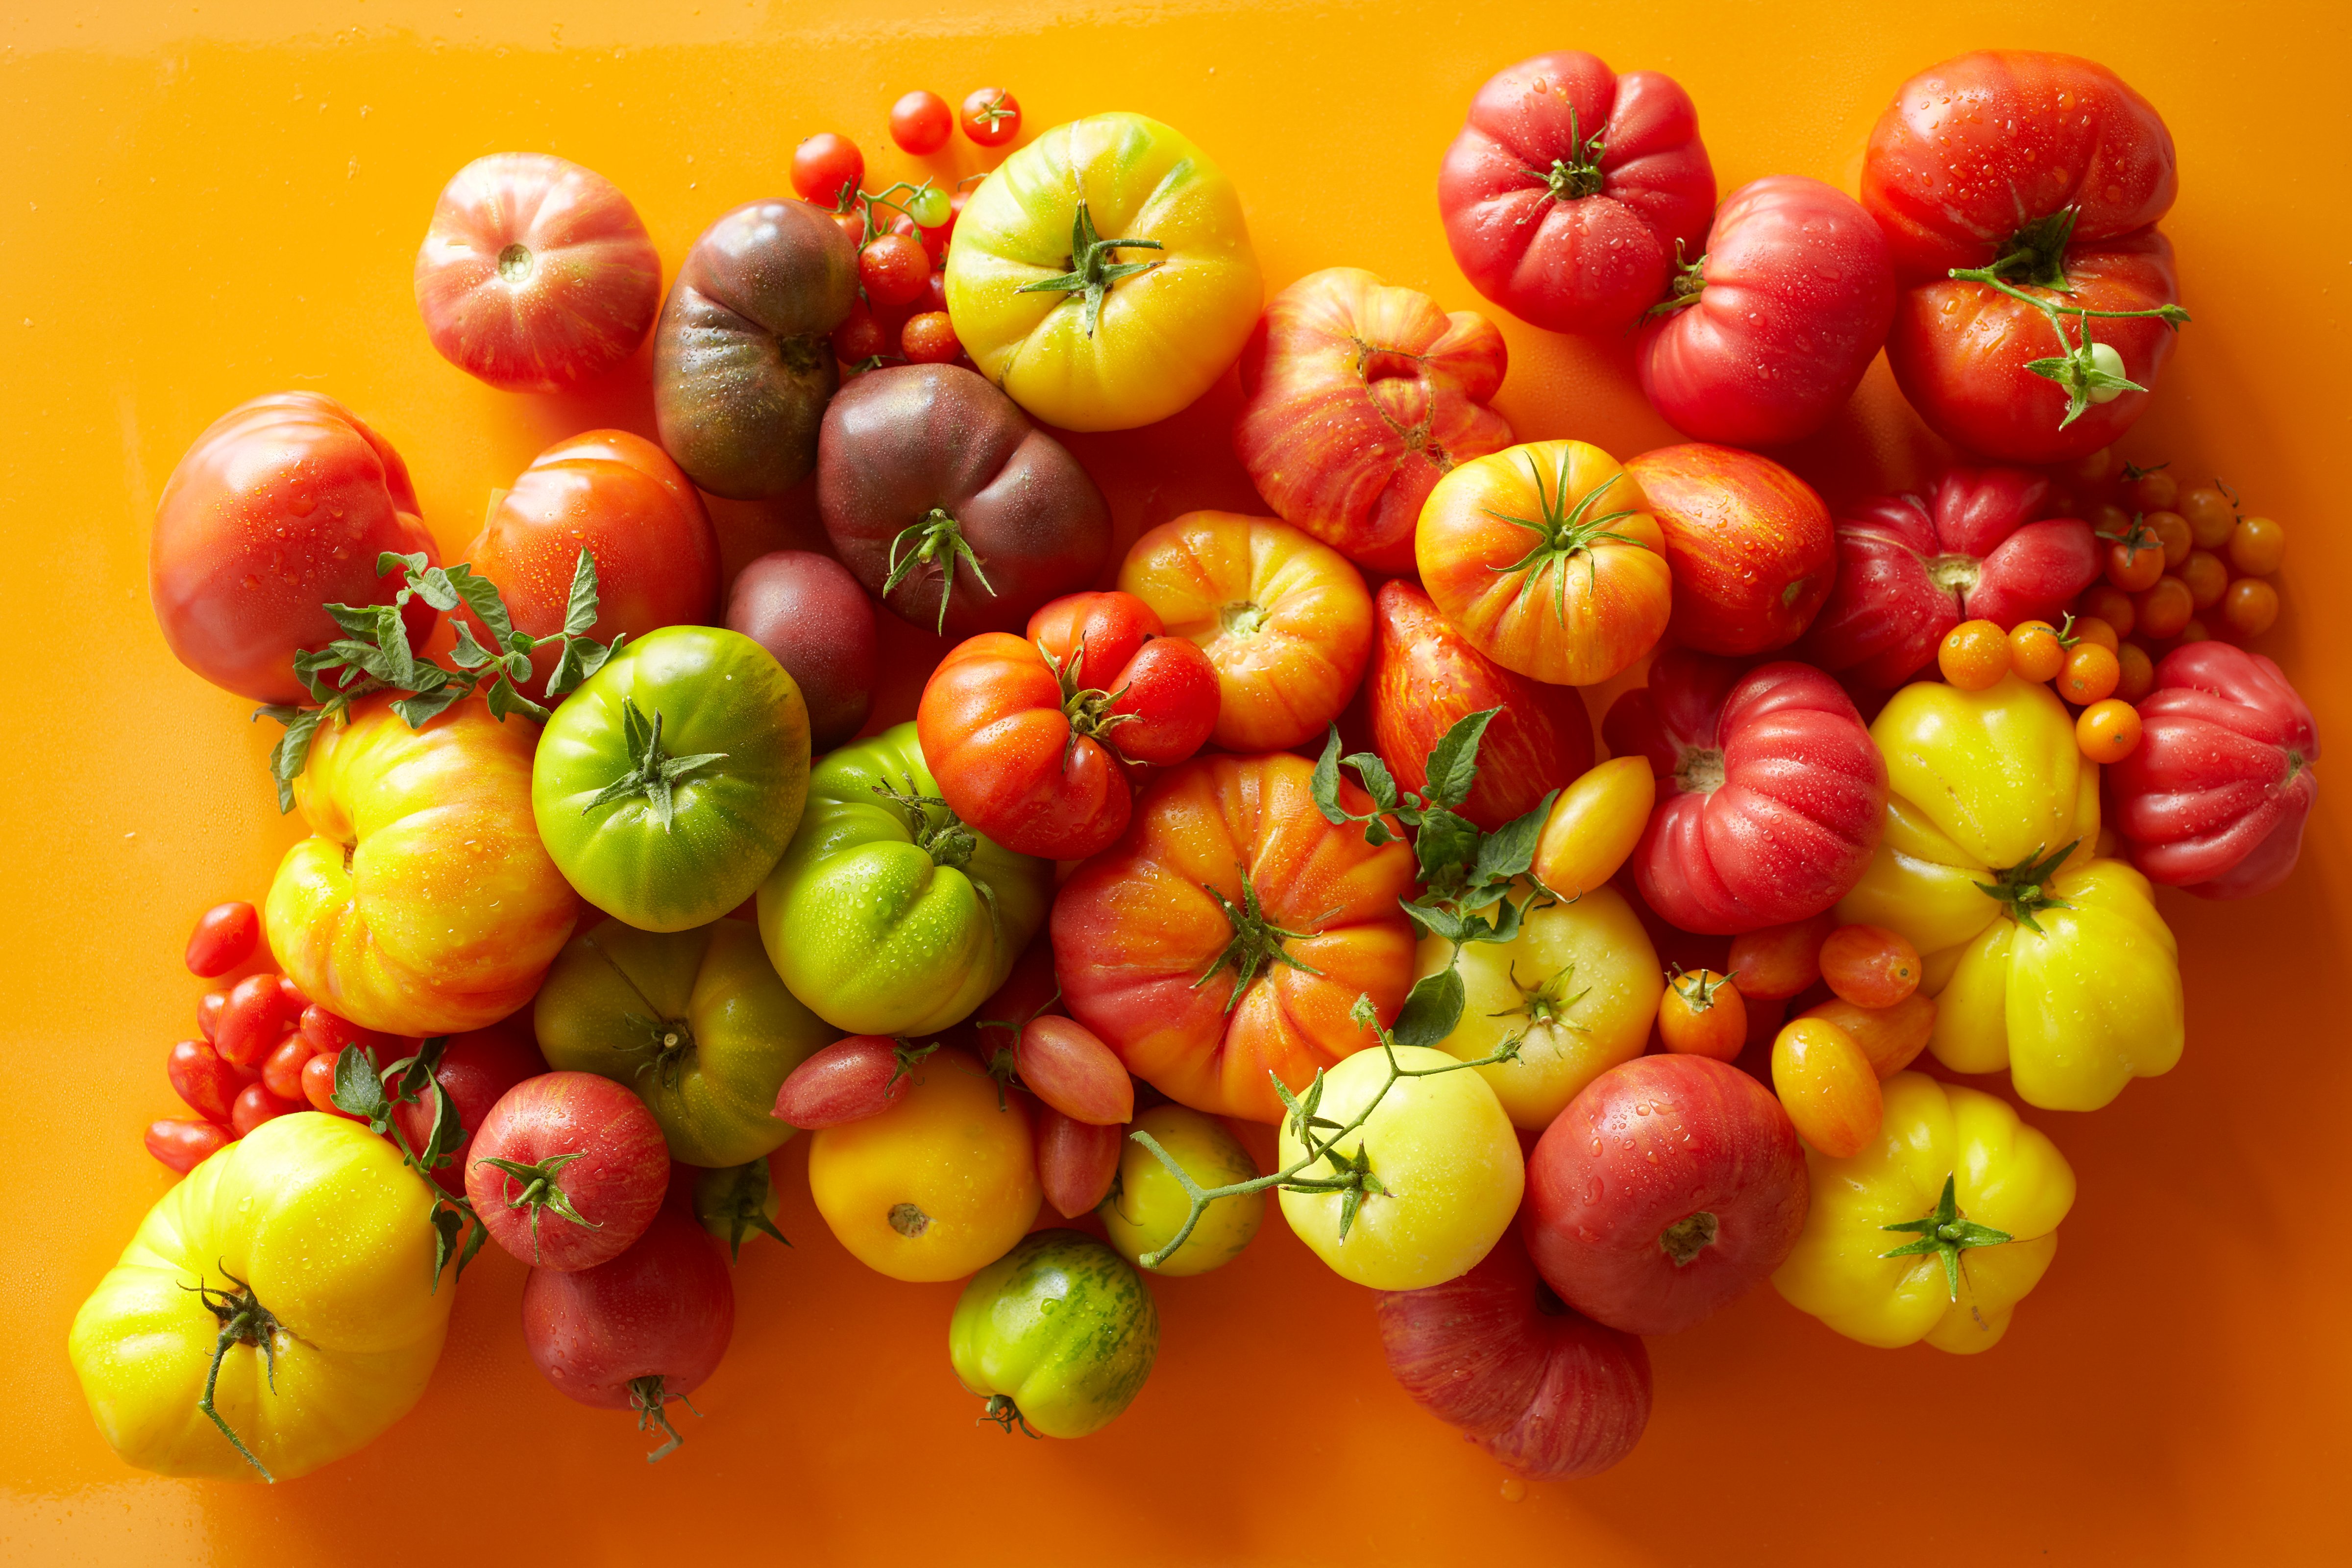 A bounty of fresh tomatoes including heriloom, cherry and green. (Getty Images)